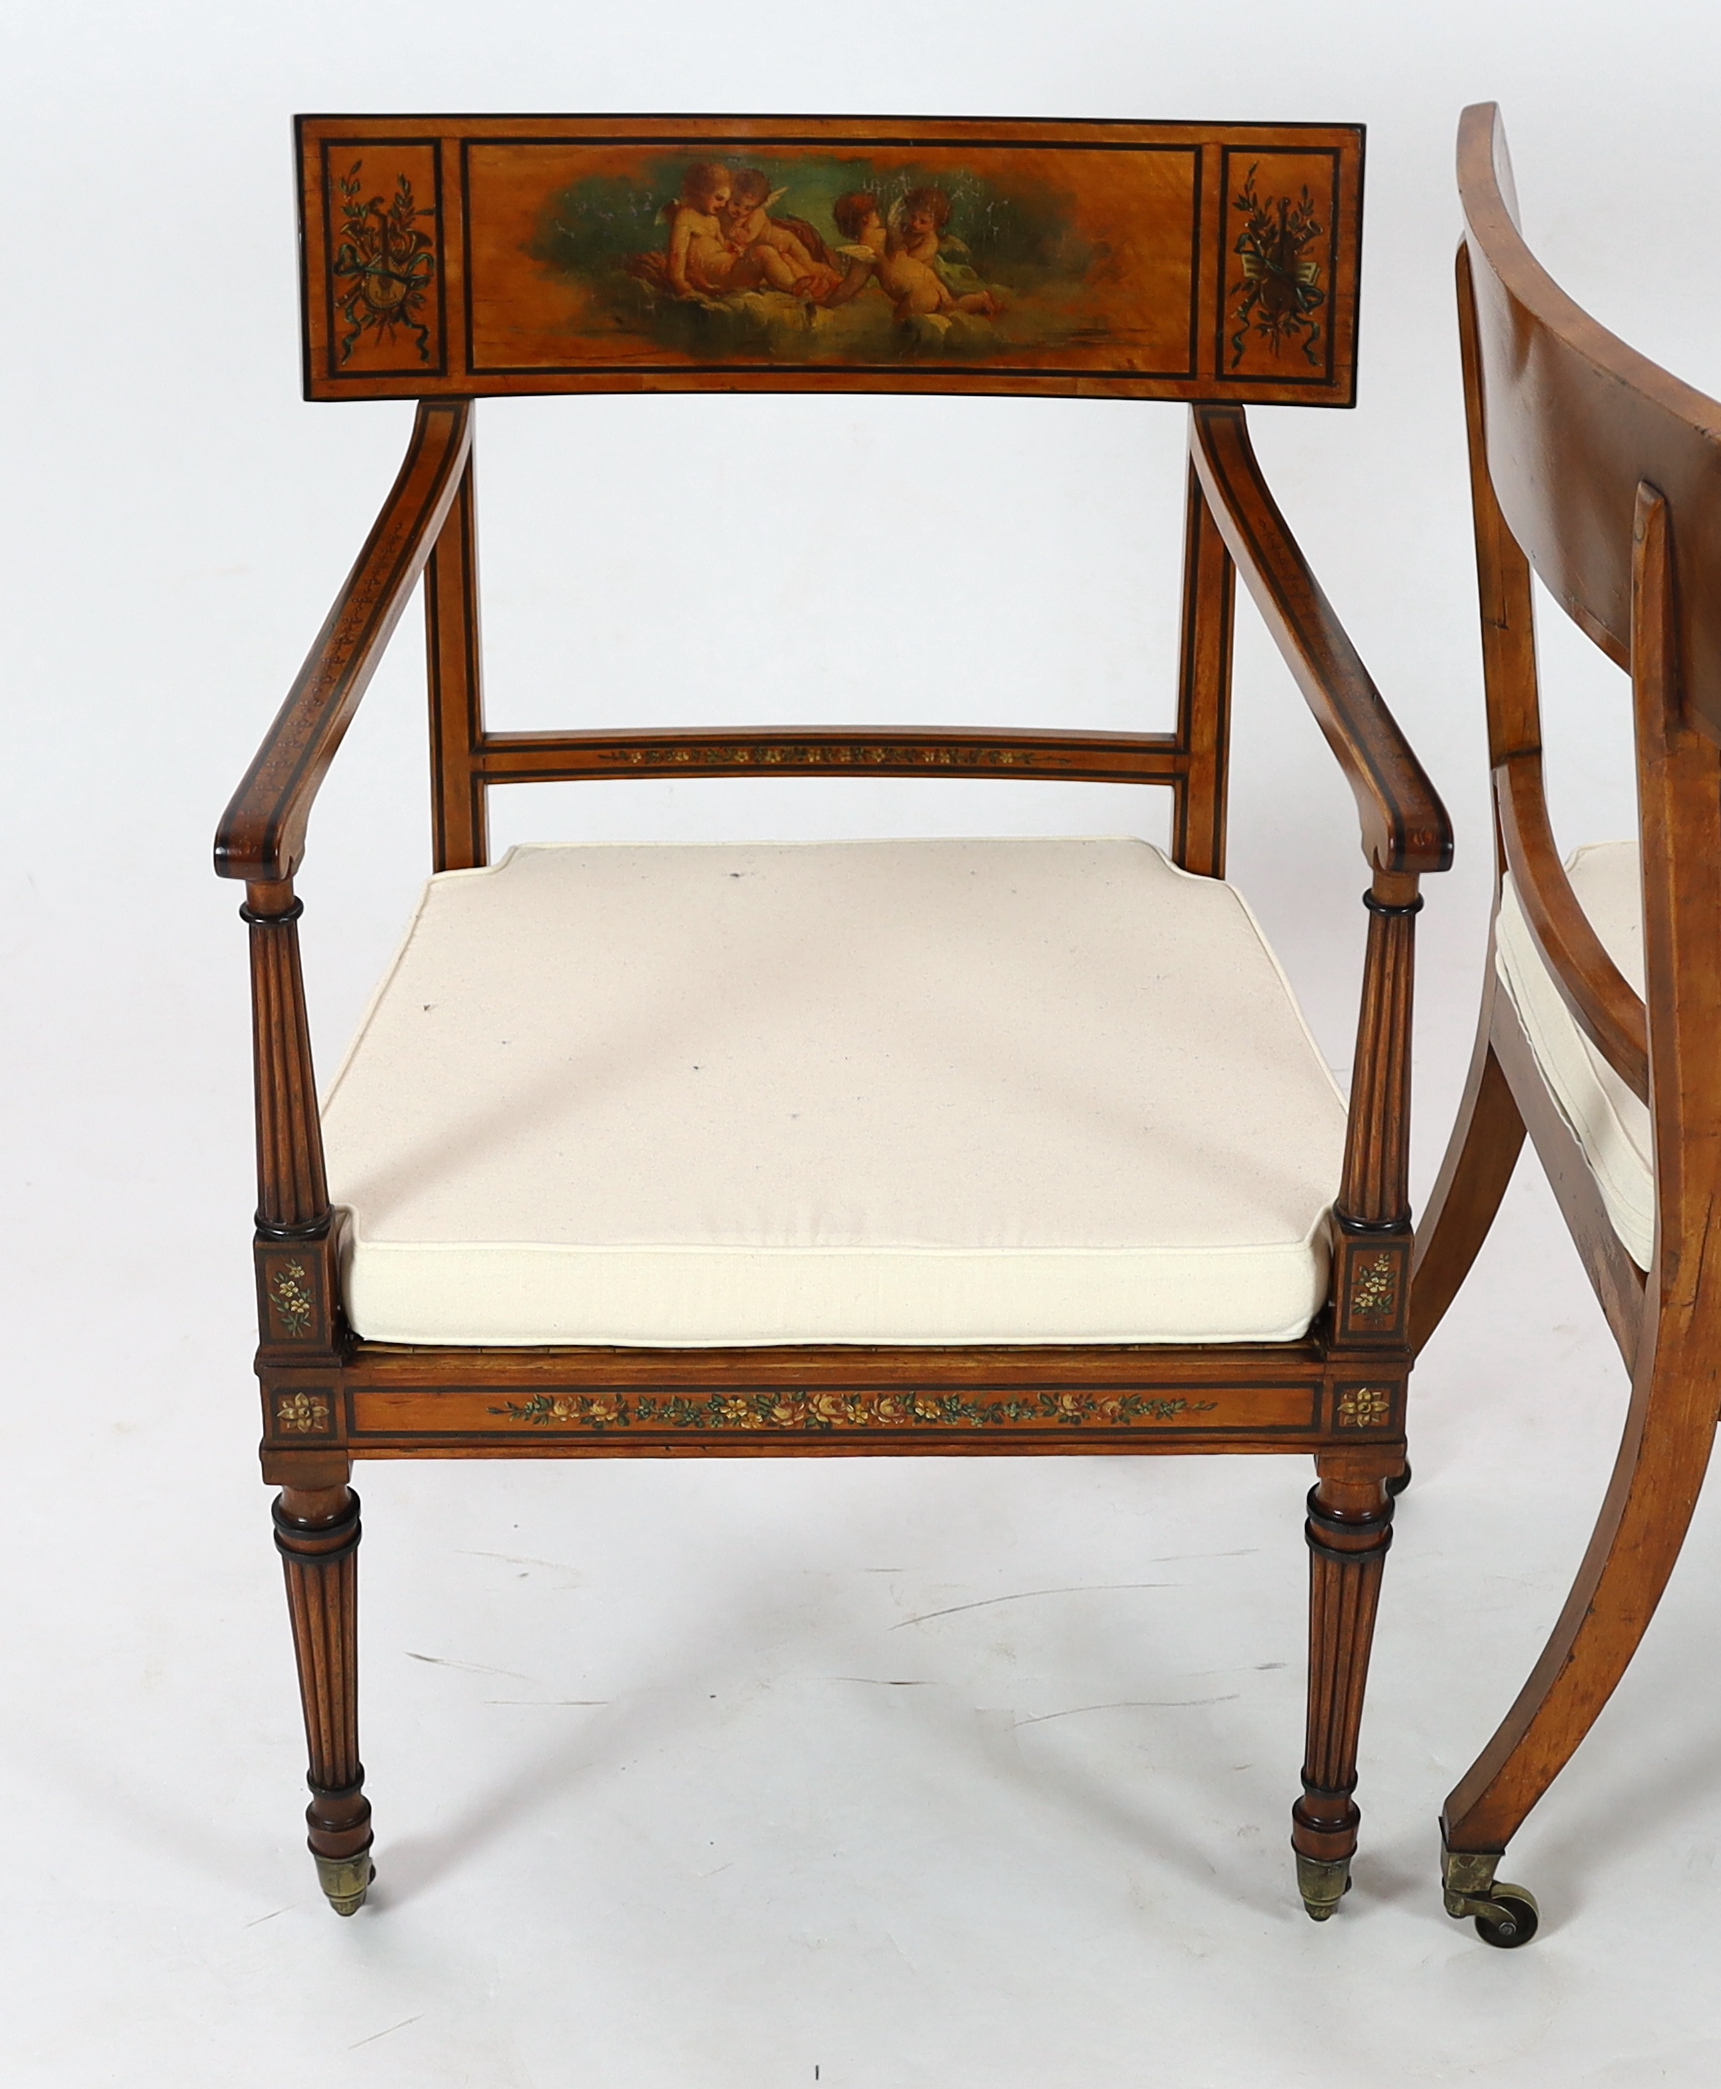 A pair of Edwardian Sheraton revival painted satinwood elbow chairs, decorated with cherubs, flowers - Image 2 of 4